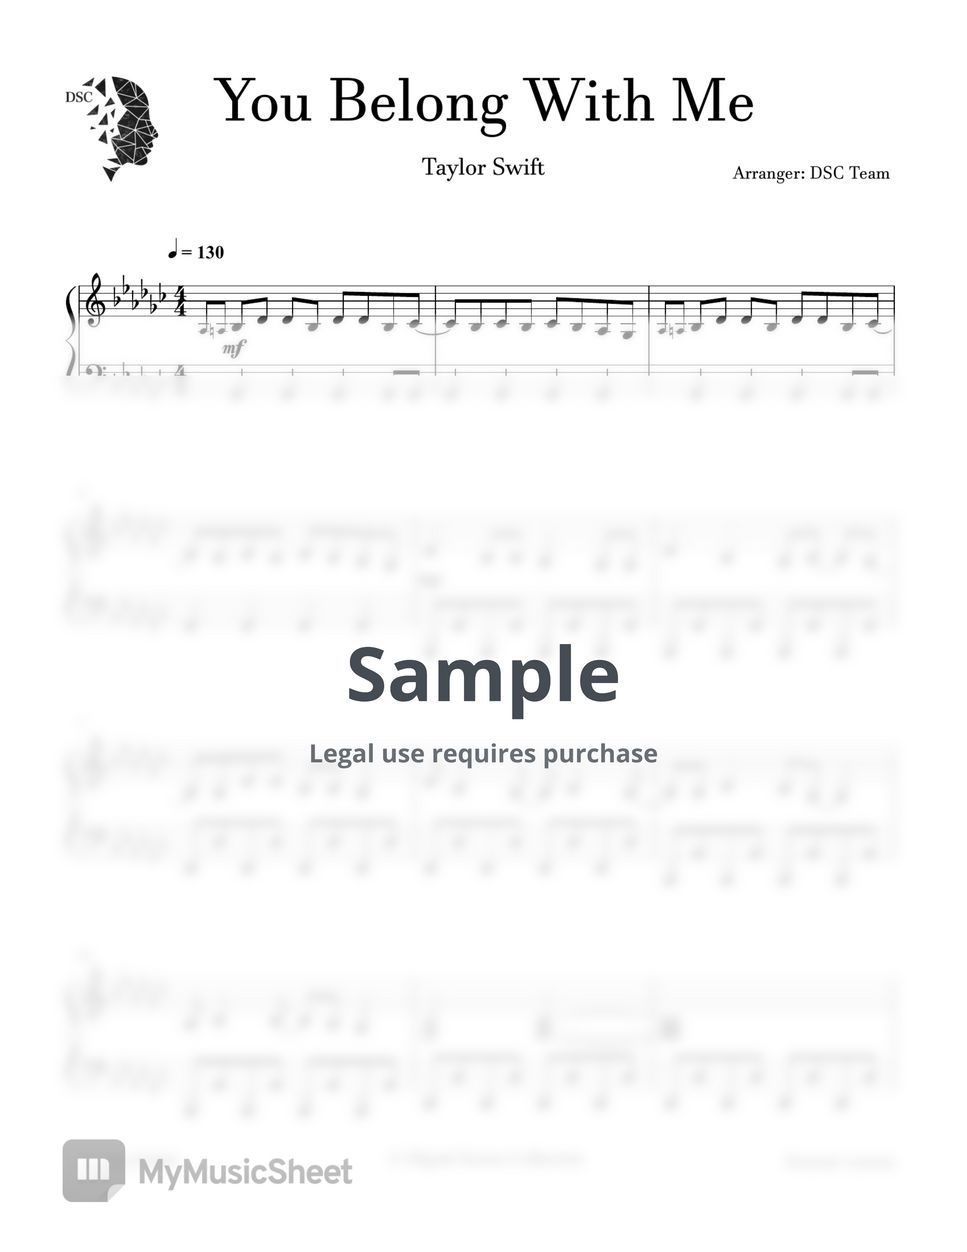 Taylor Swift ft. Liz Rose - You Belong With Me by Digital Scores Collection